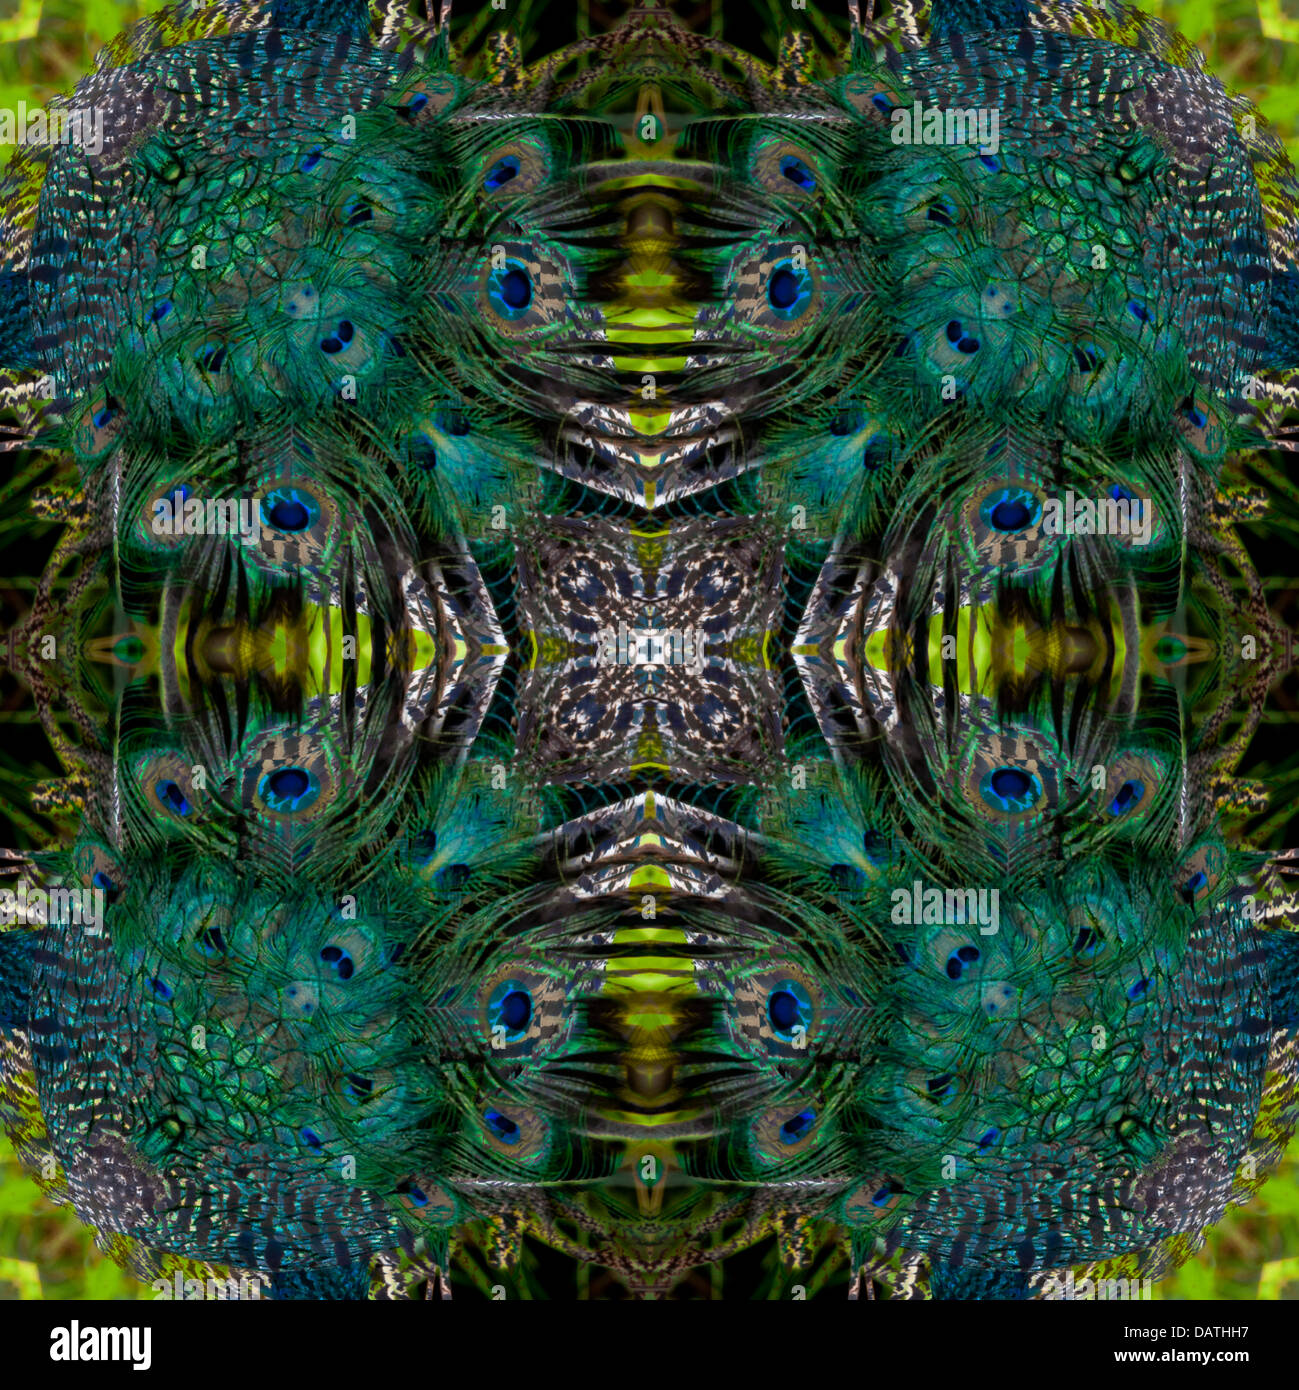 Digitally manipulated abstract square image of a peacock which results in a stunning symmetrical kaleidoscope of blue and greens Stock Photo